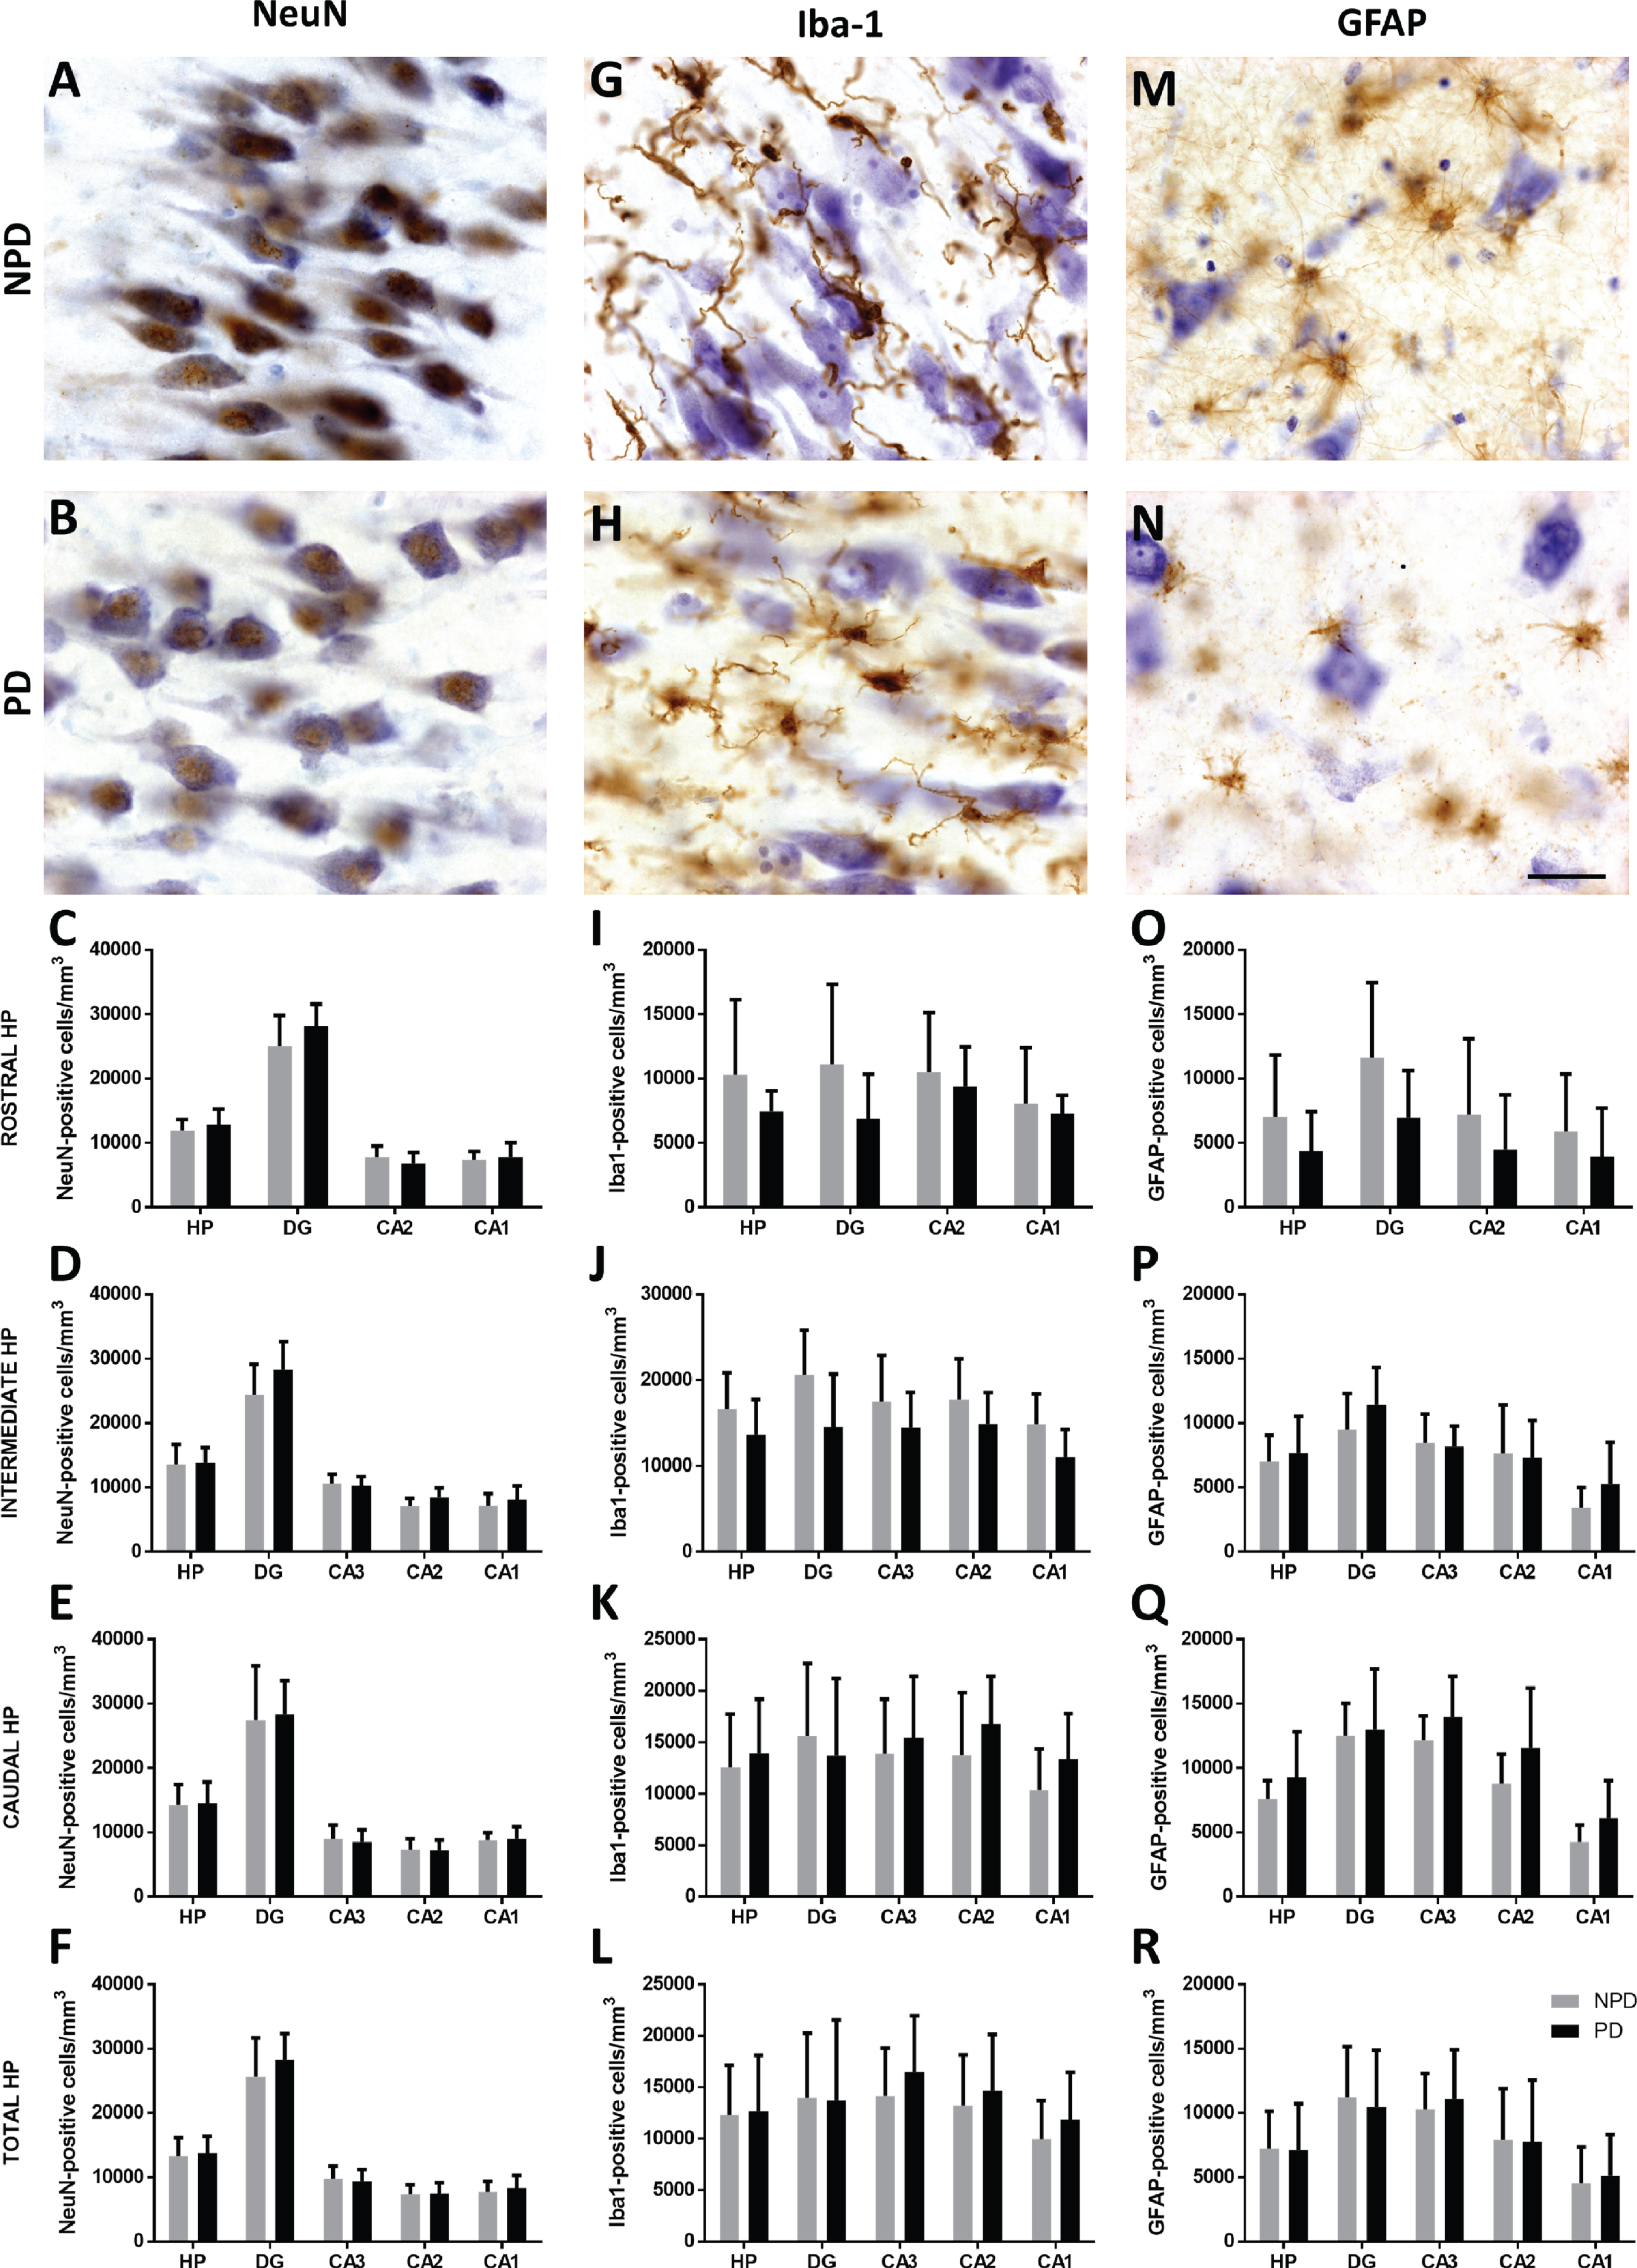 Coronal sections of the human hippocampus immunohistochemically stained for NeuN (A-B), Iba-1 (G-H) and GFAP (M-N). The mean±SD of NeuN (C-F)-, Iba-1 (I-L)- and GFAP (O-R)-positive cell density of hippocampal regions in the rostral, intermediate, caudal and total hippocampus. Scale bar 25μm (A-N).